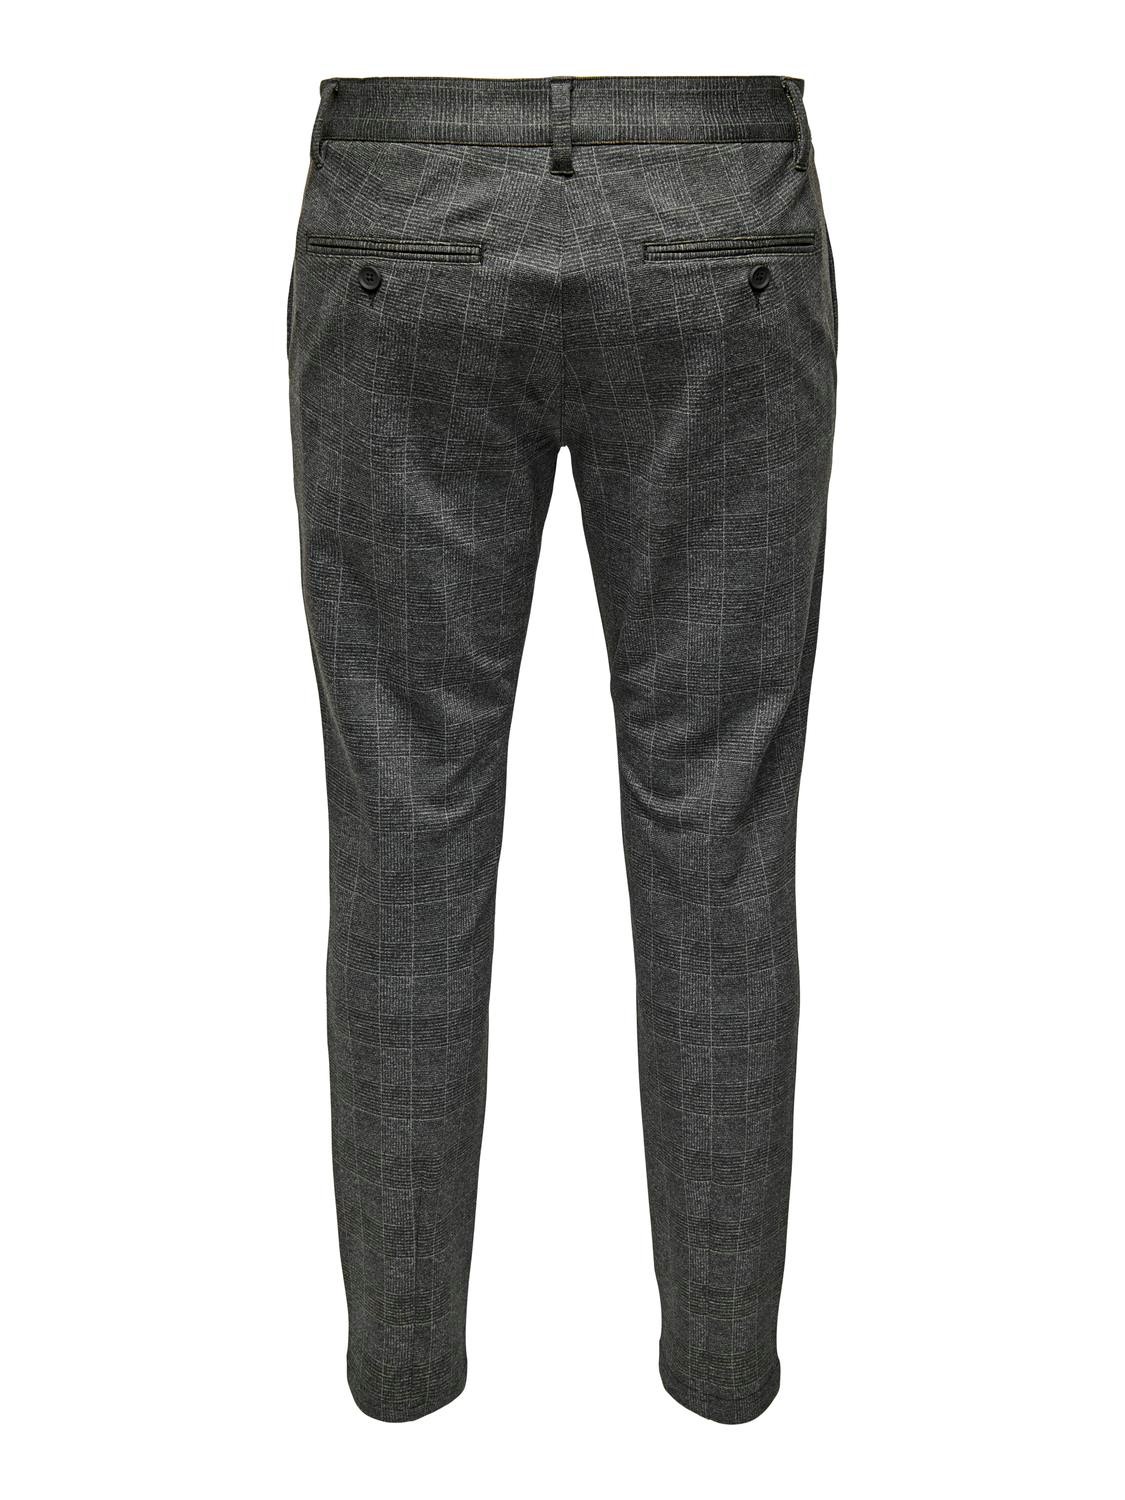 ONLY & SONS Slim Fit Mid waist Trousers -Black - 22019887